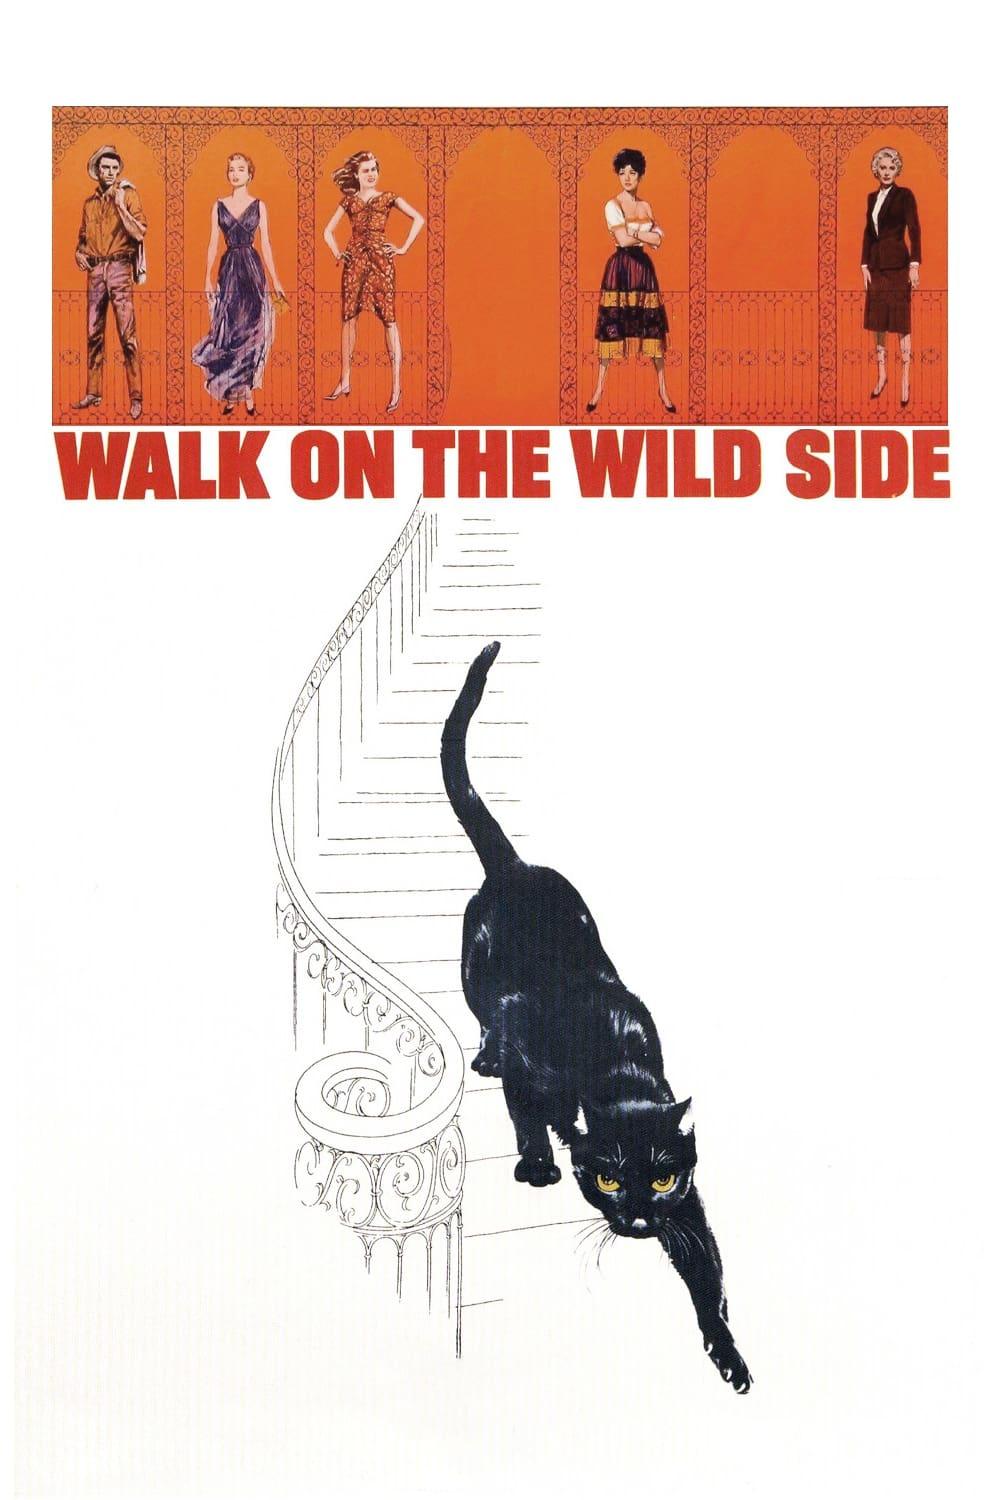 Walk on the Wild Side poster